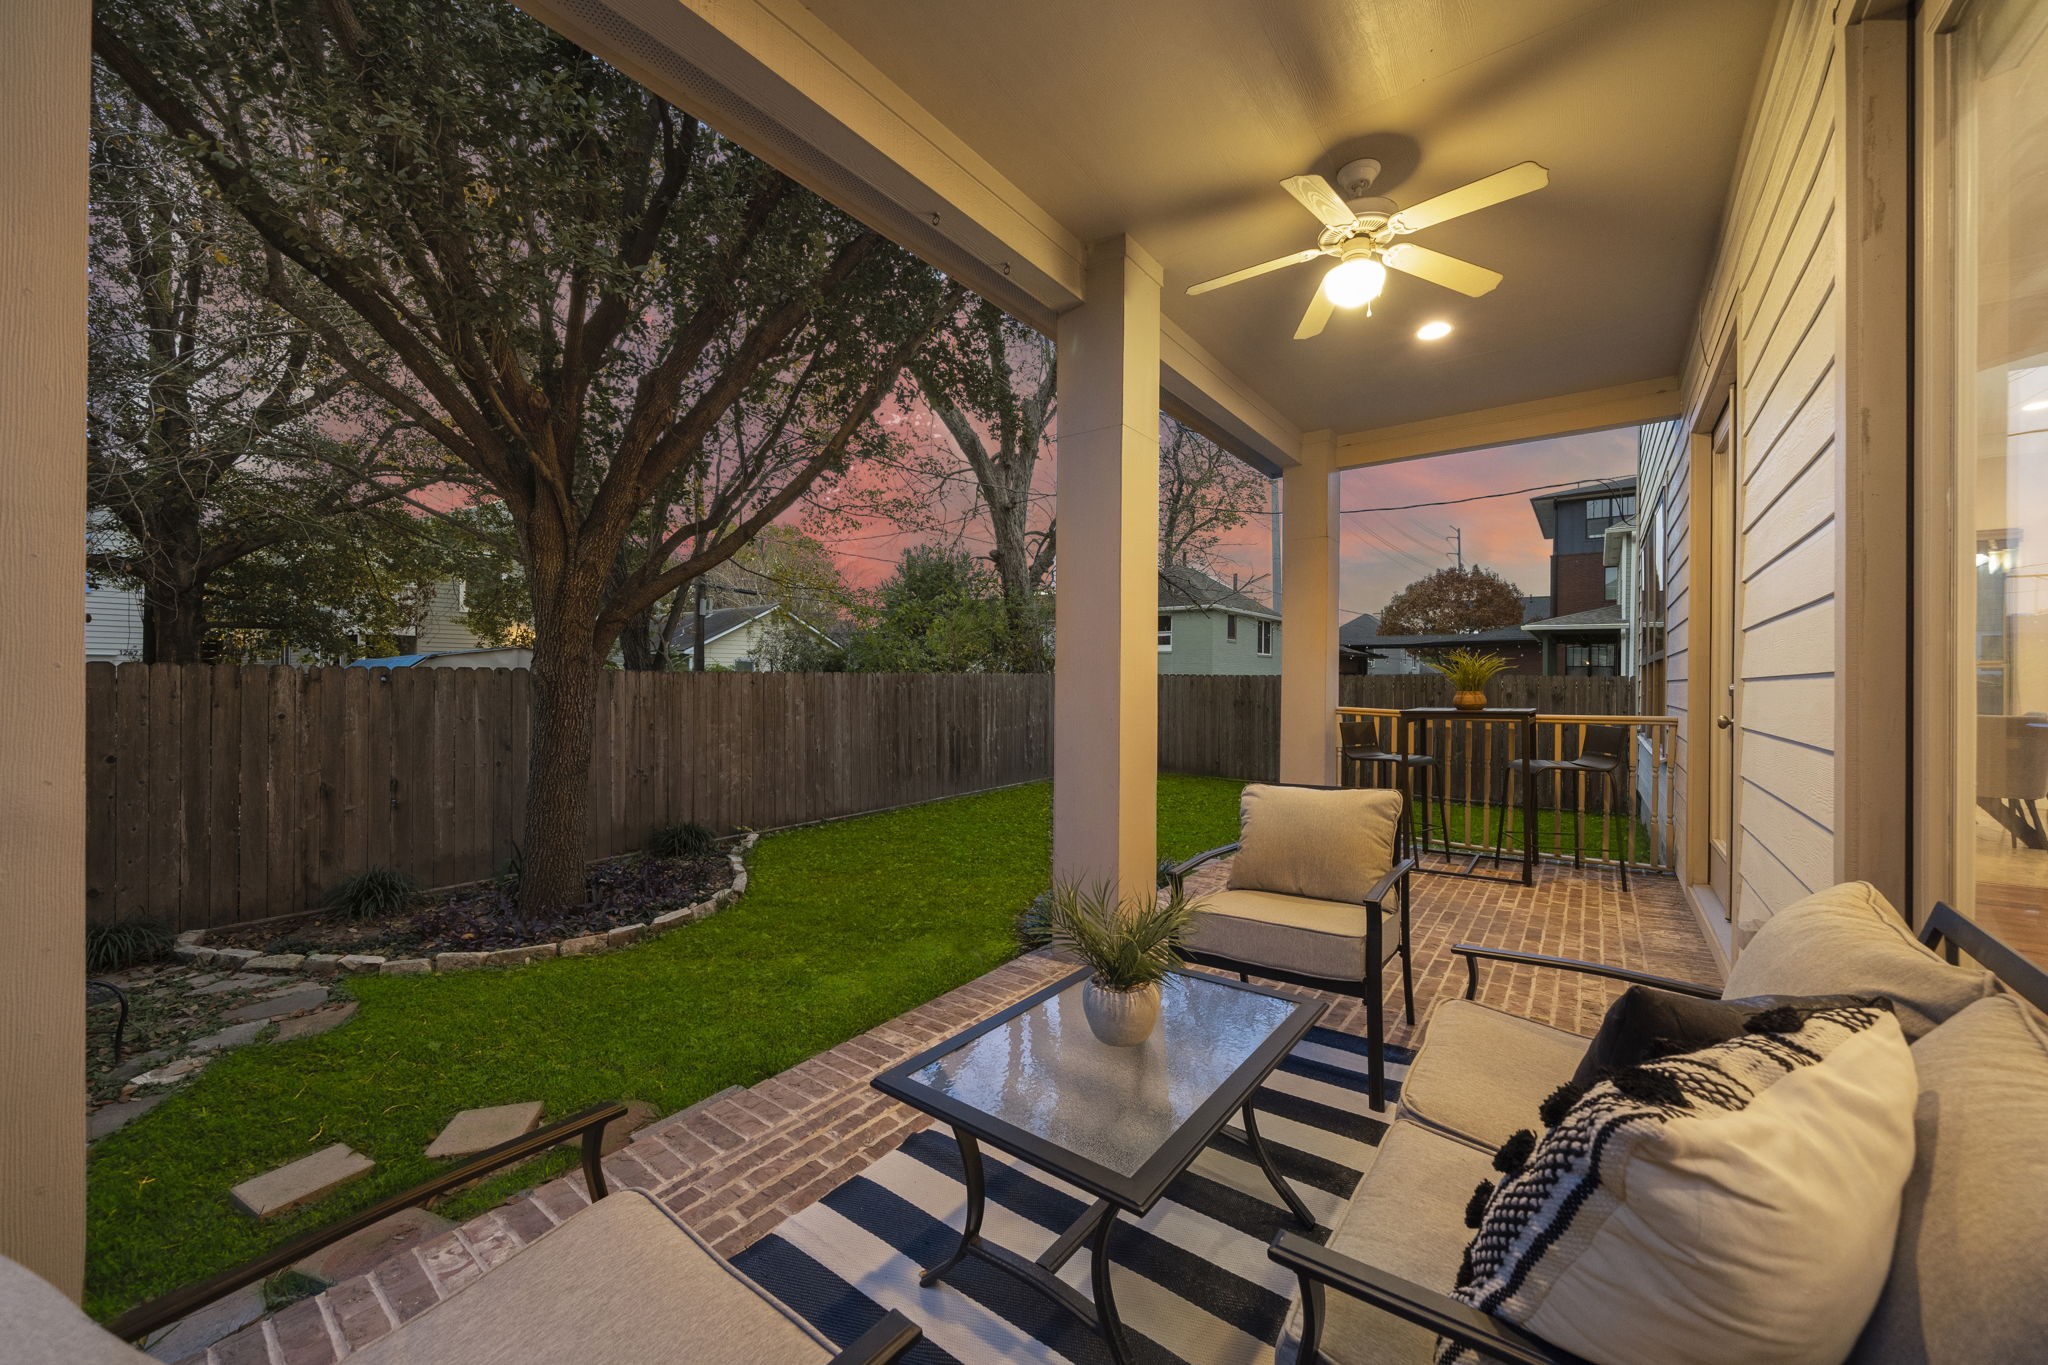 Unforgettable gatherings await in the fully fenced backyard oasis, featuring a brick patio and lush landscaping.